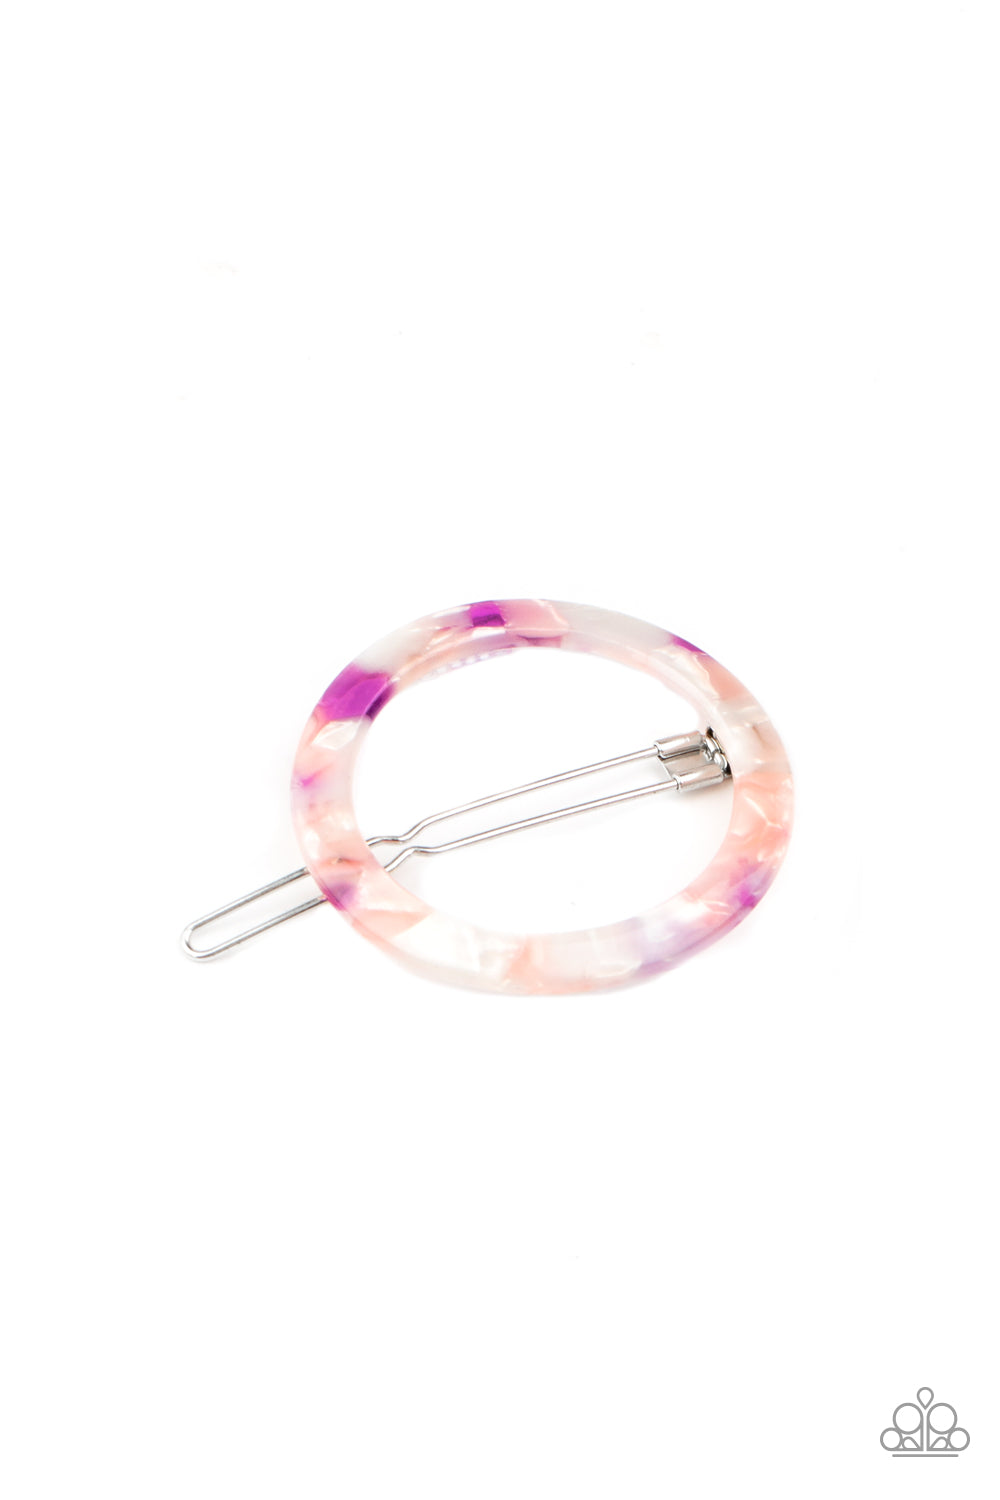 In The Round Purple Hair Clip - Paparazzi Accessories